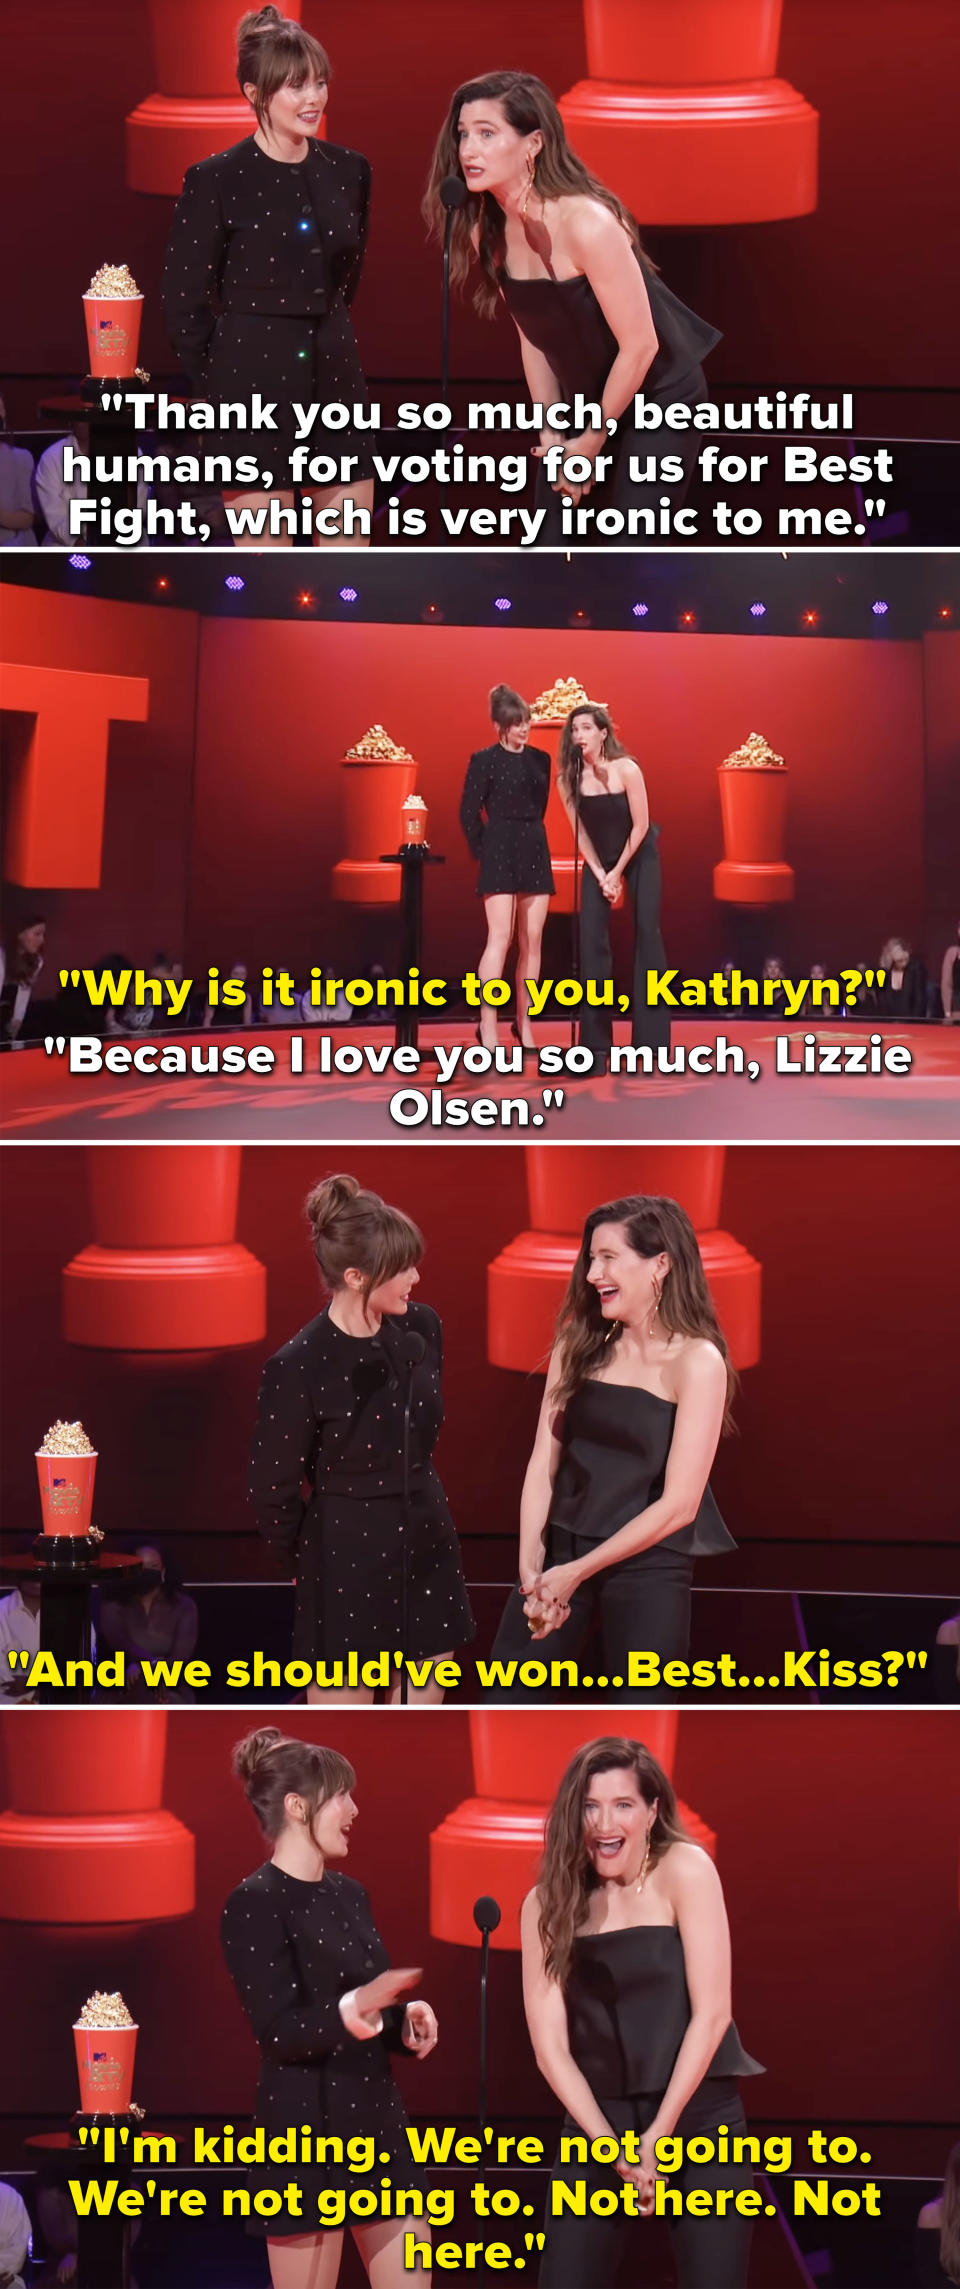 Elizabeth Olsen and Kathryn Hawn accepting an award for Best Fight, but saying, "And we should've won...Best...Kiss?"